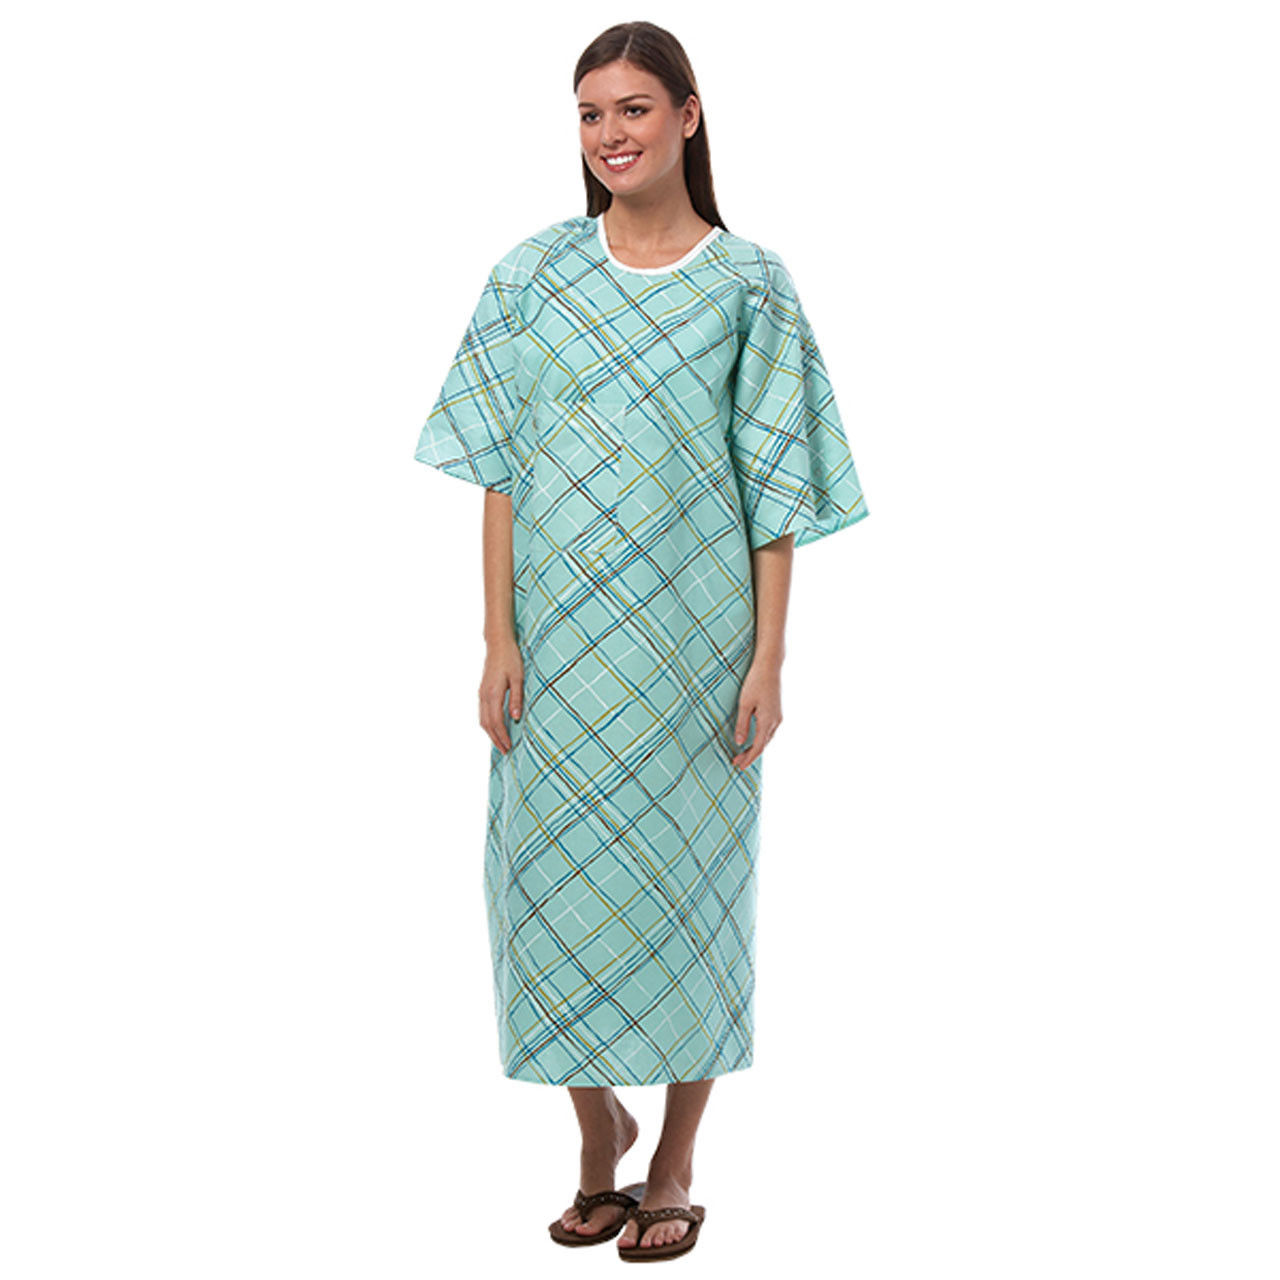 What material is the green Fashion Seal Hospital Gown made from?